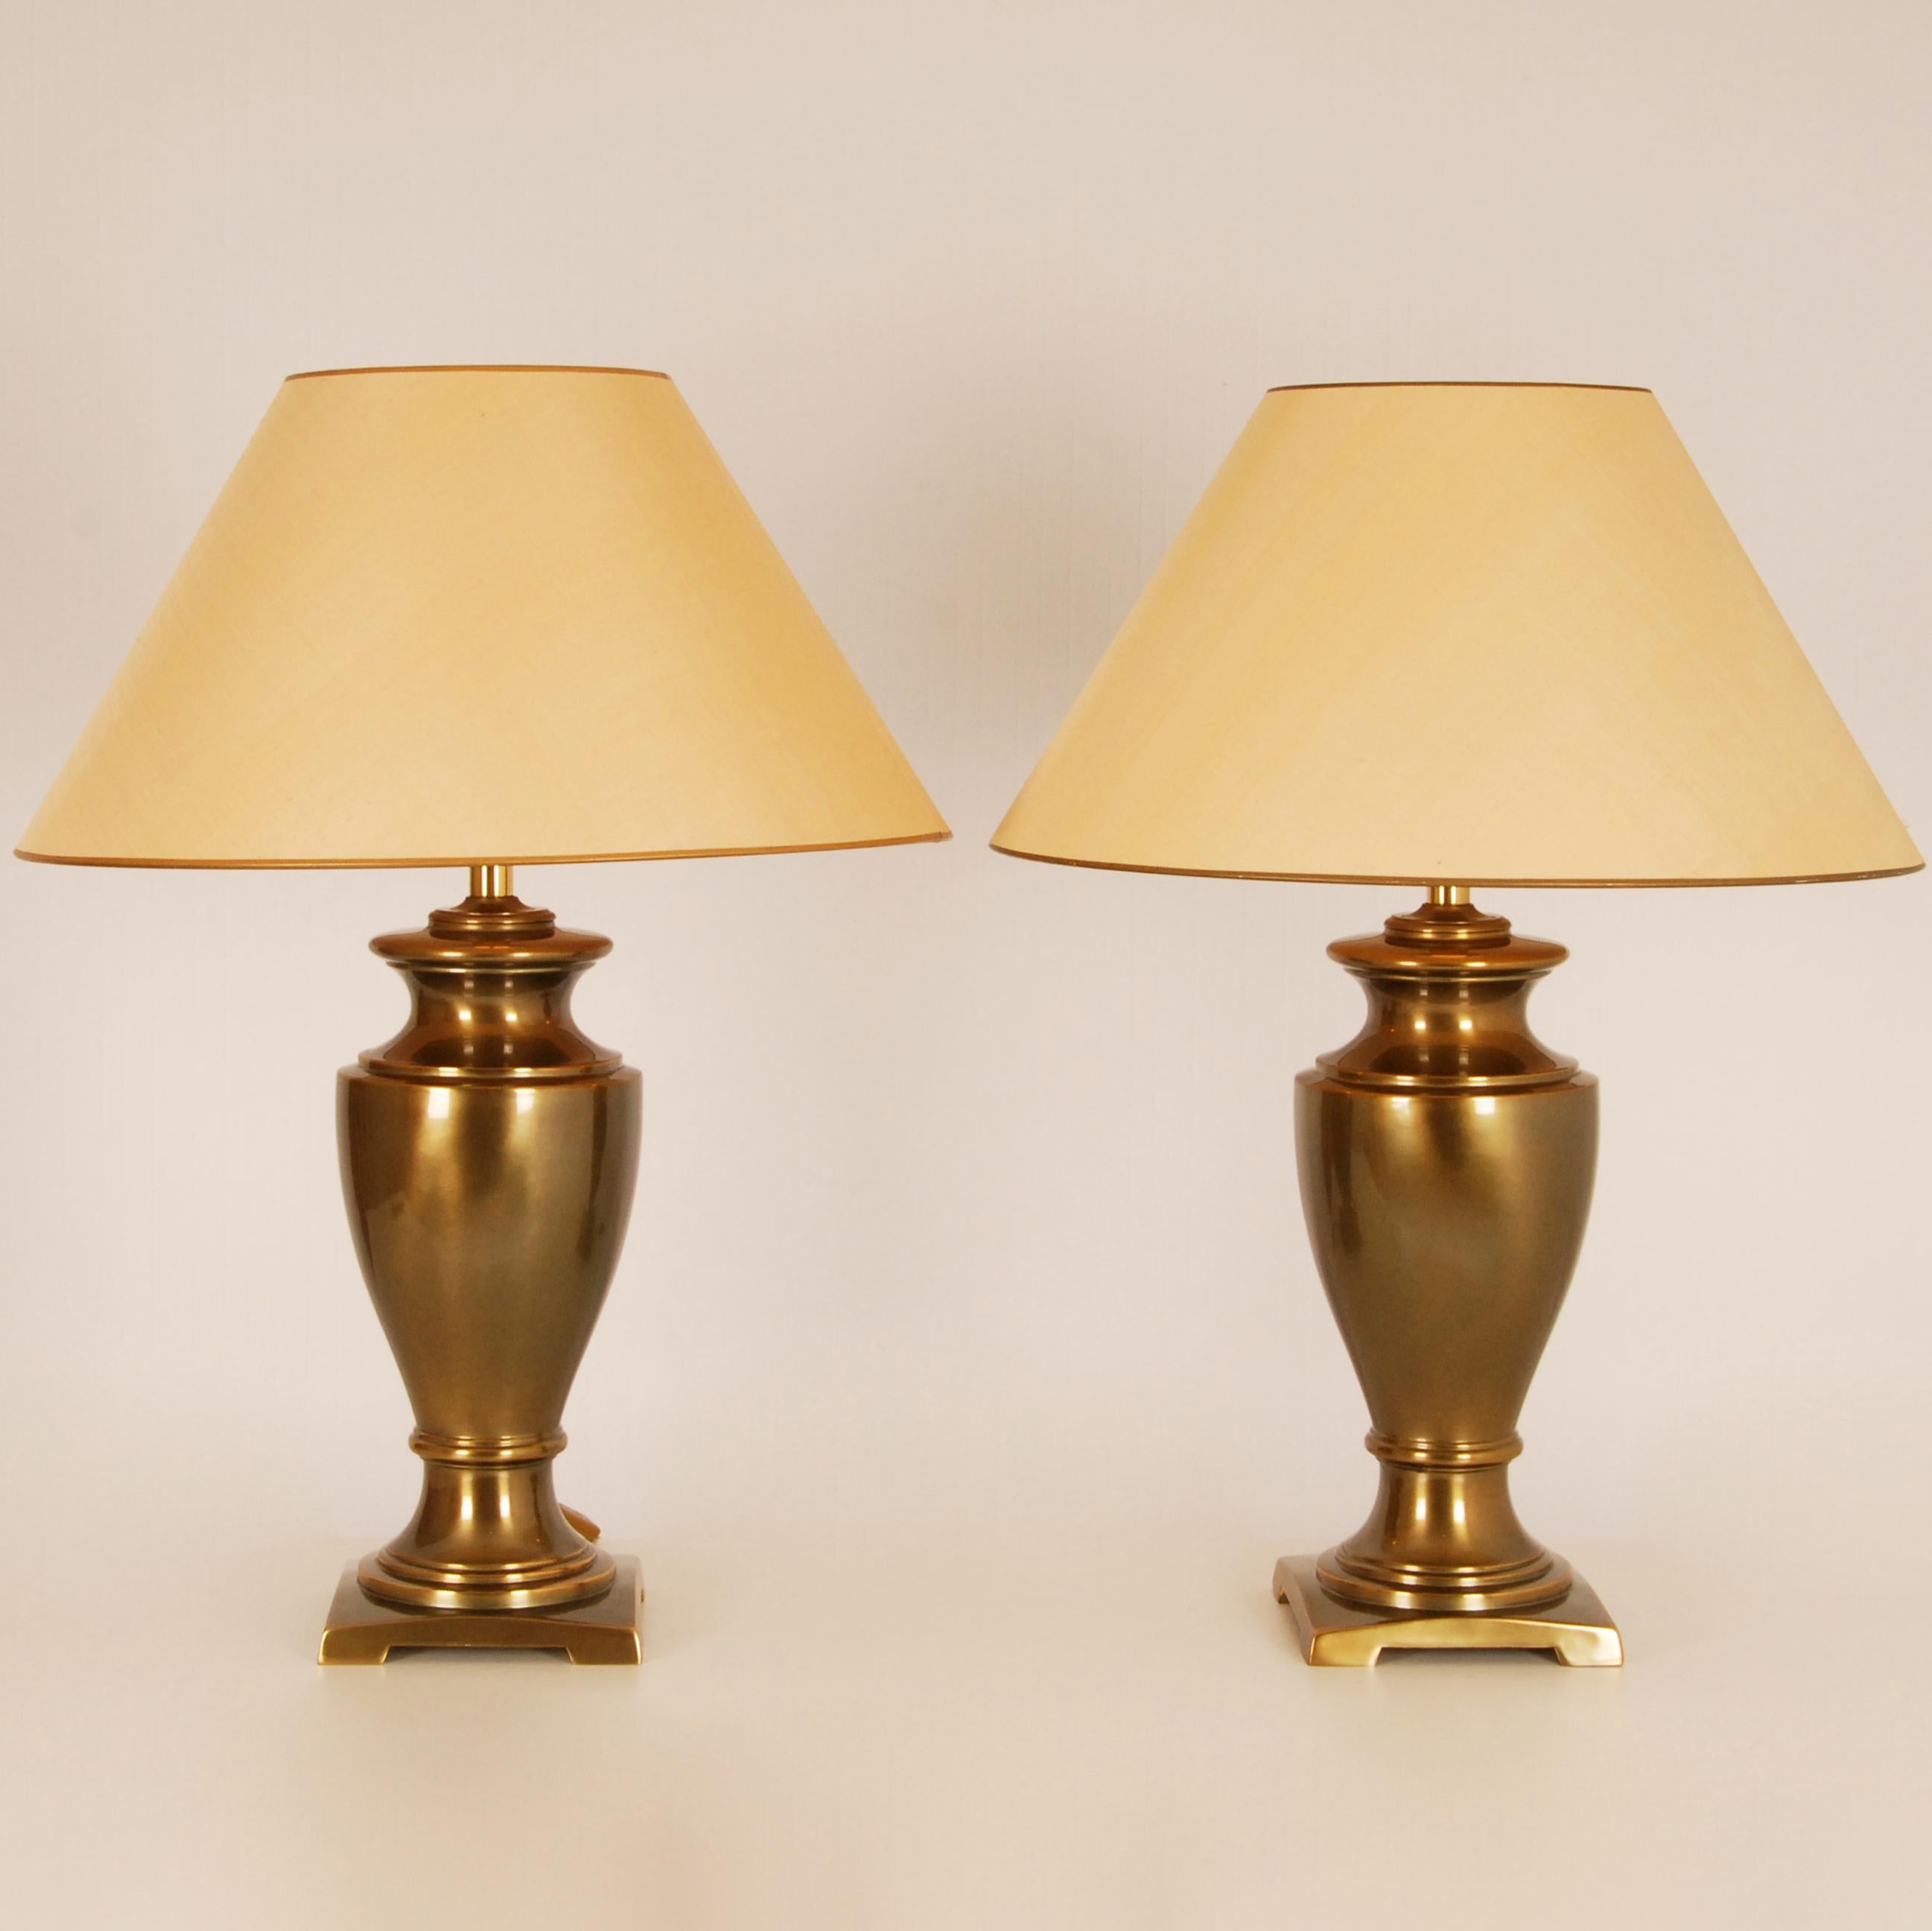 Vintage 1970s Gold Gilt Brass Neoclassical Vase Table Lamps, a Pair For Sale 4